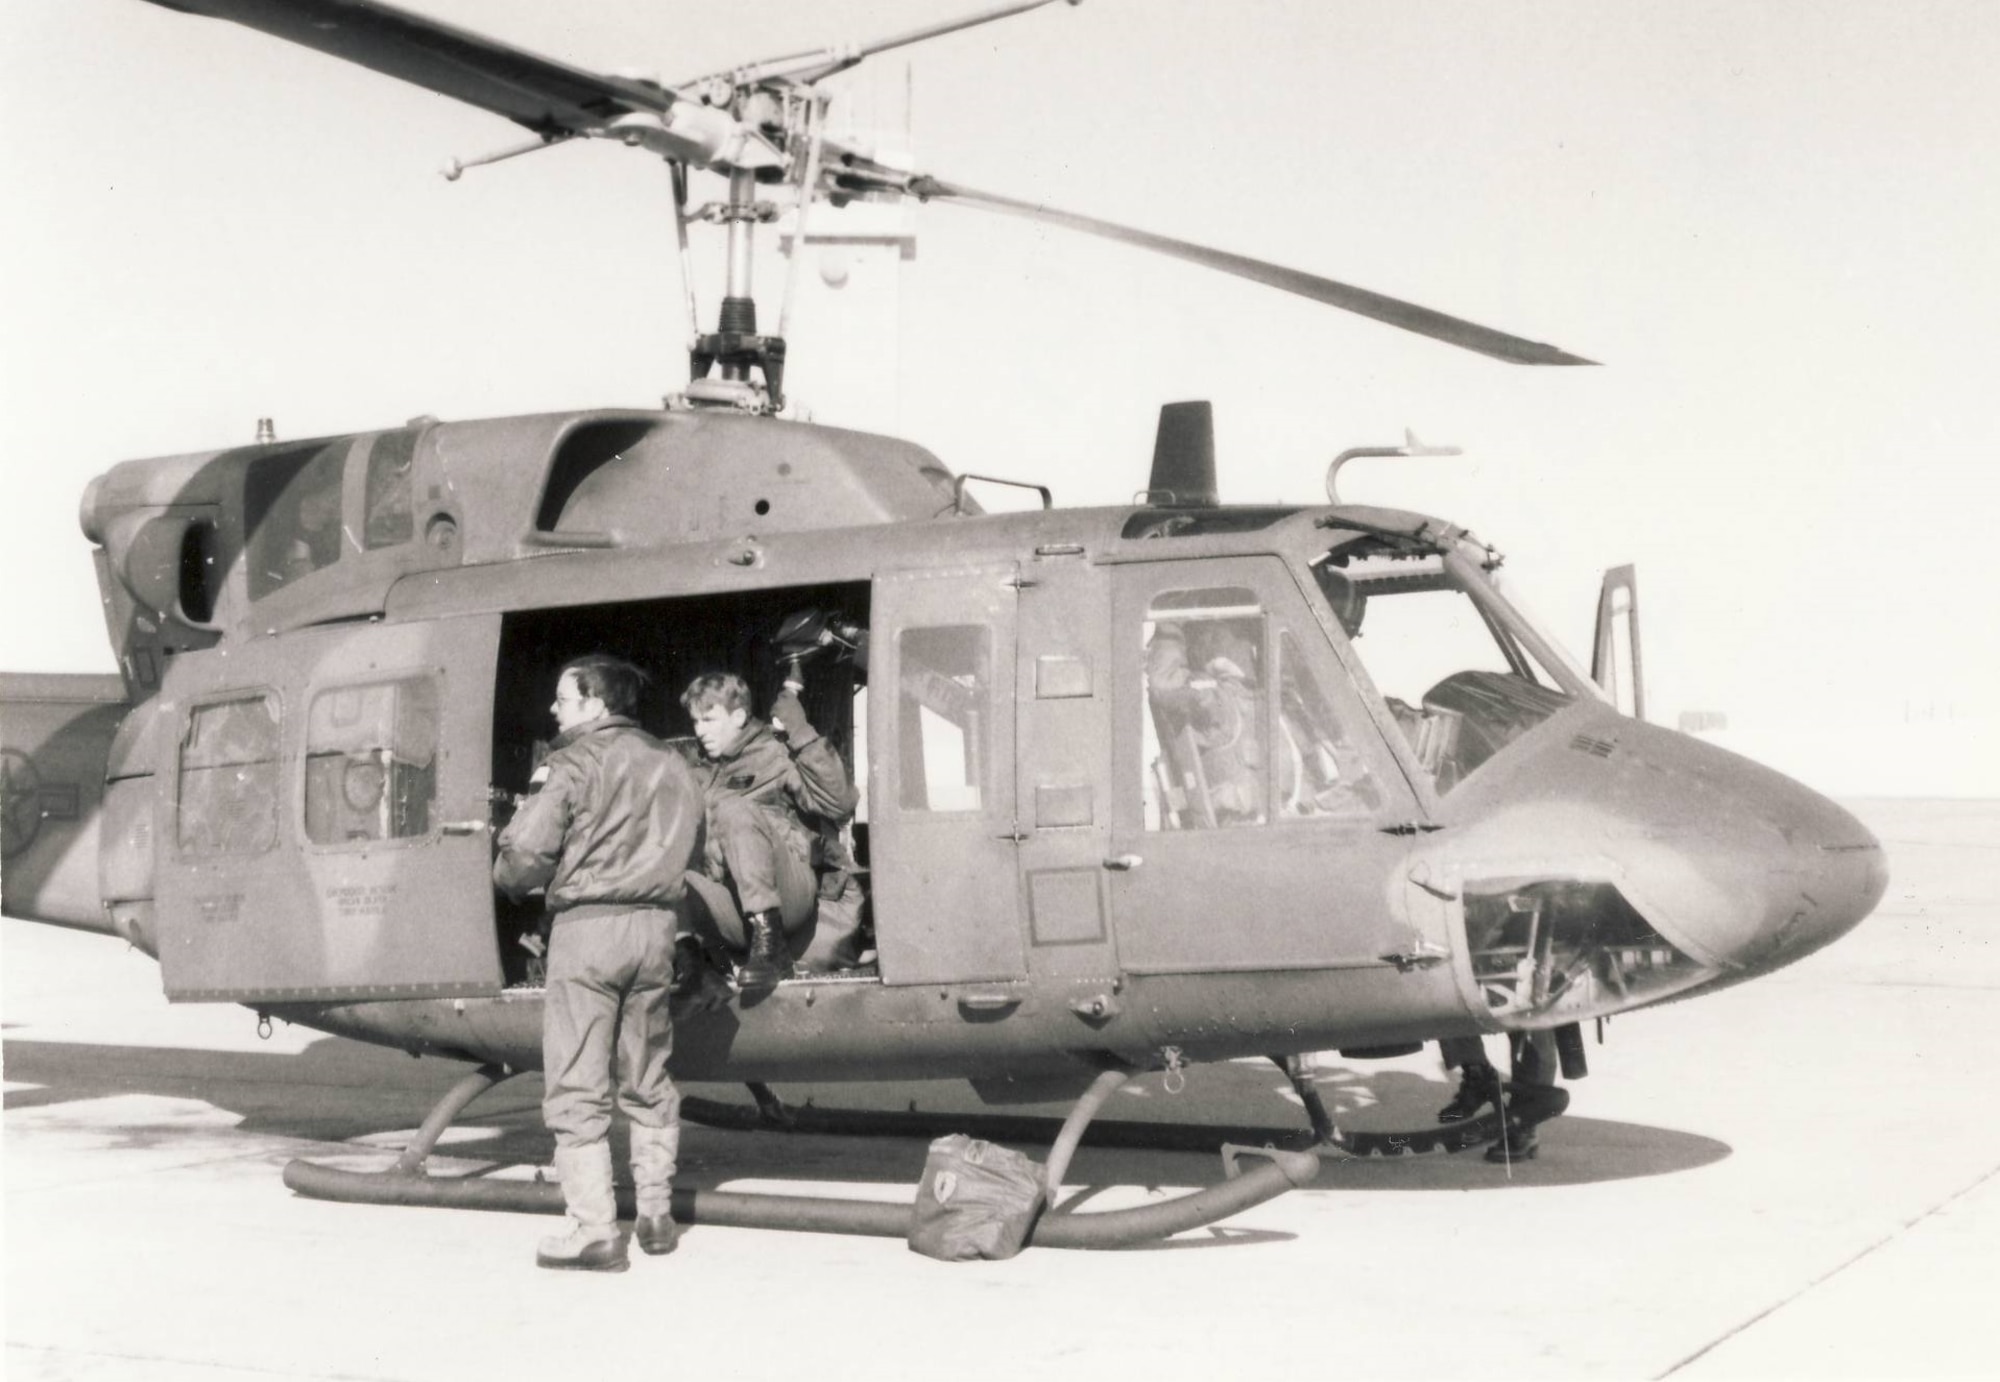 UH-1 helicopters used by the rescue and recovery detachments at Hill AFB in the late 1970s used a hoist system to lift personnel from the ground to the aircraft in areas the helicopter could not land.